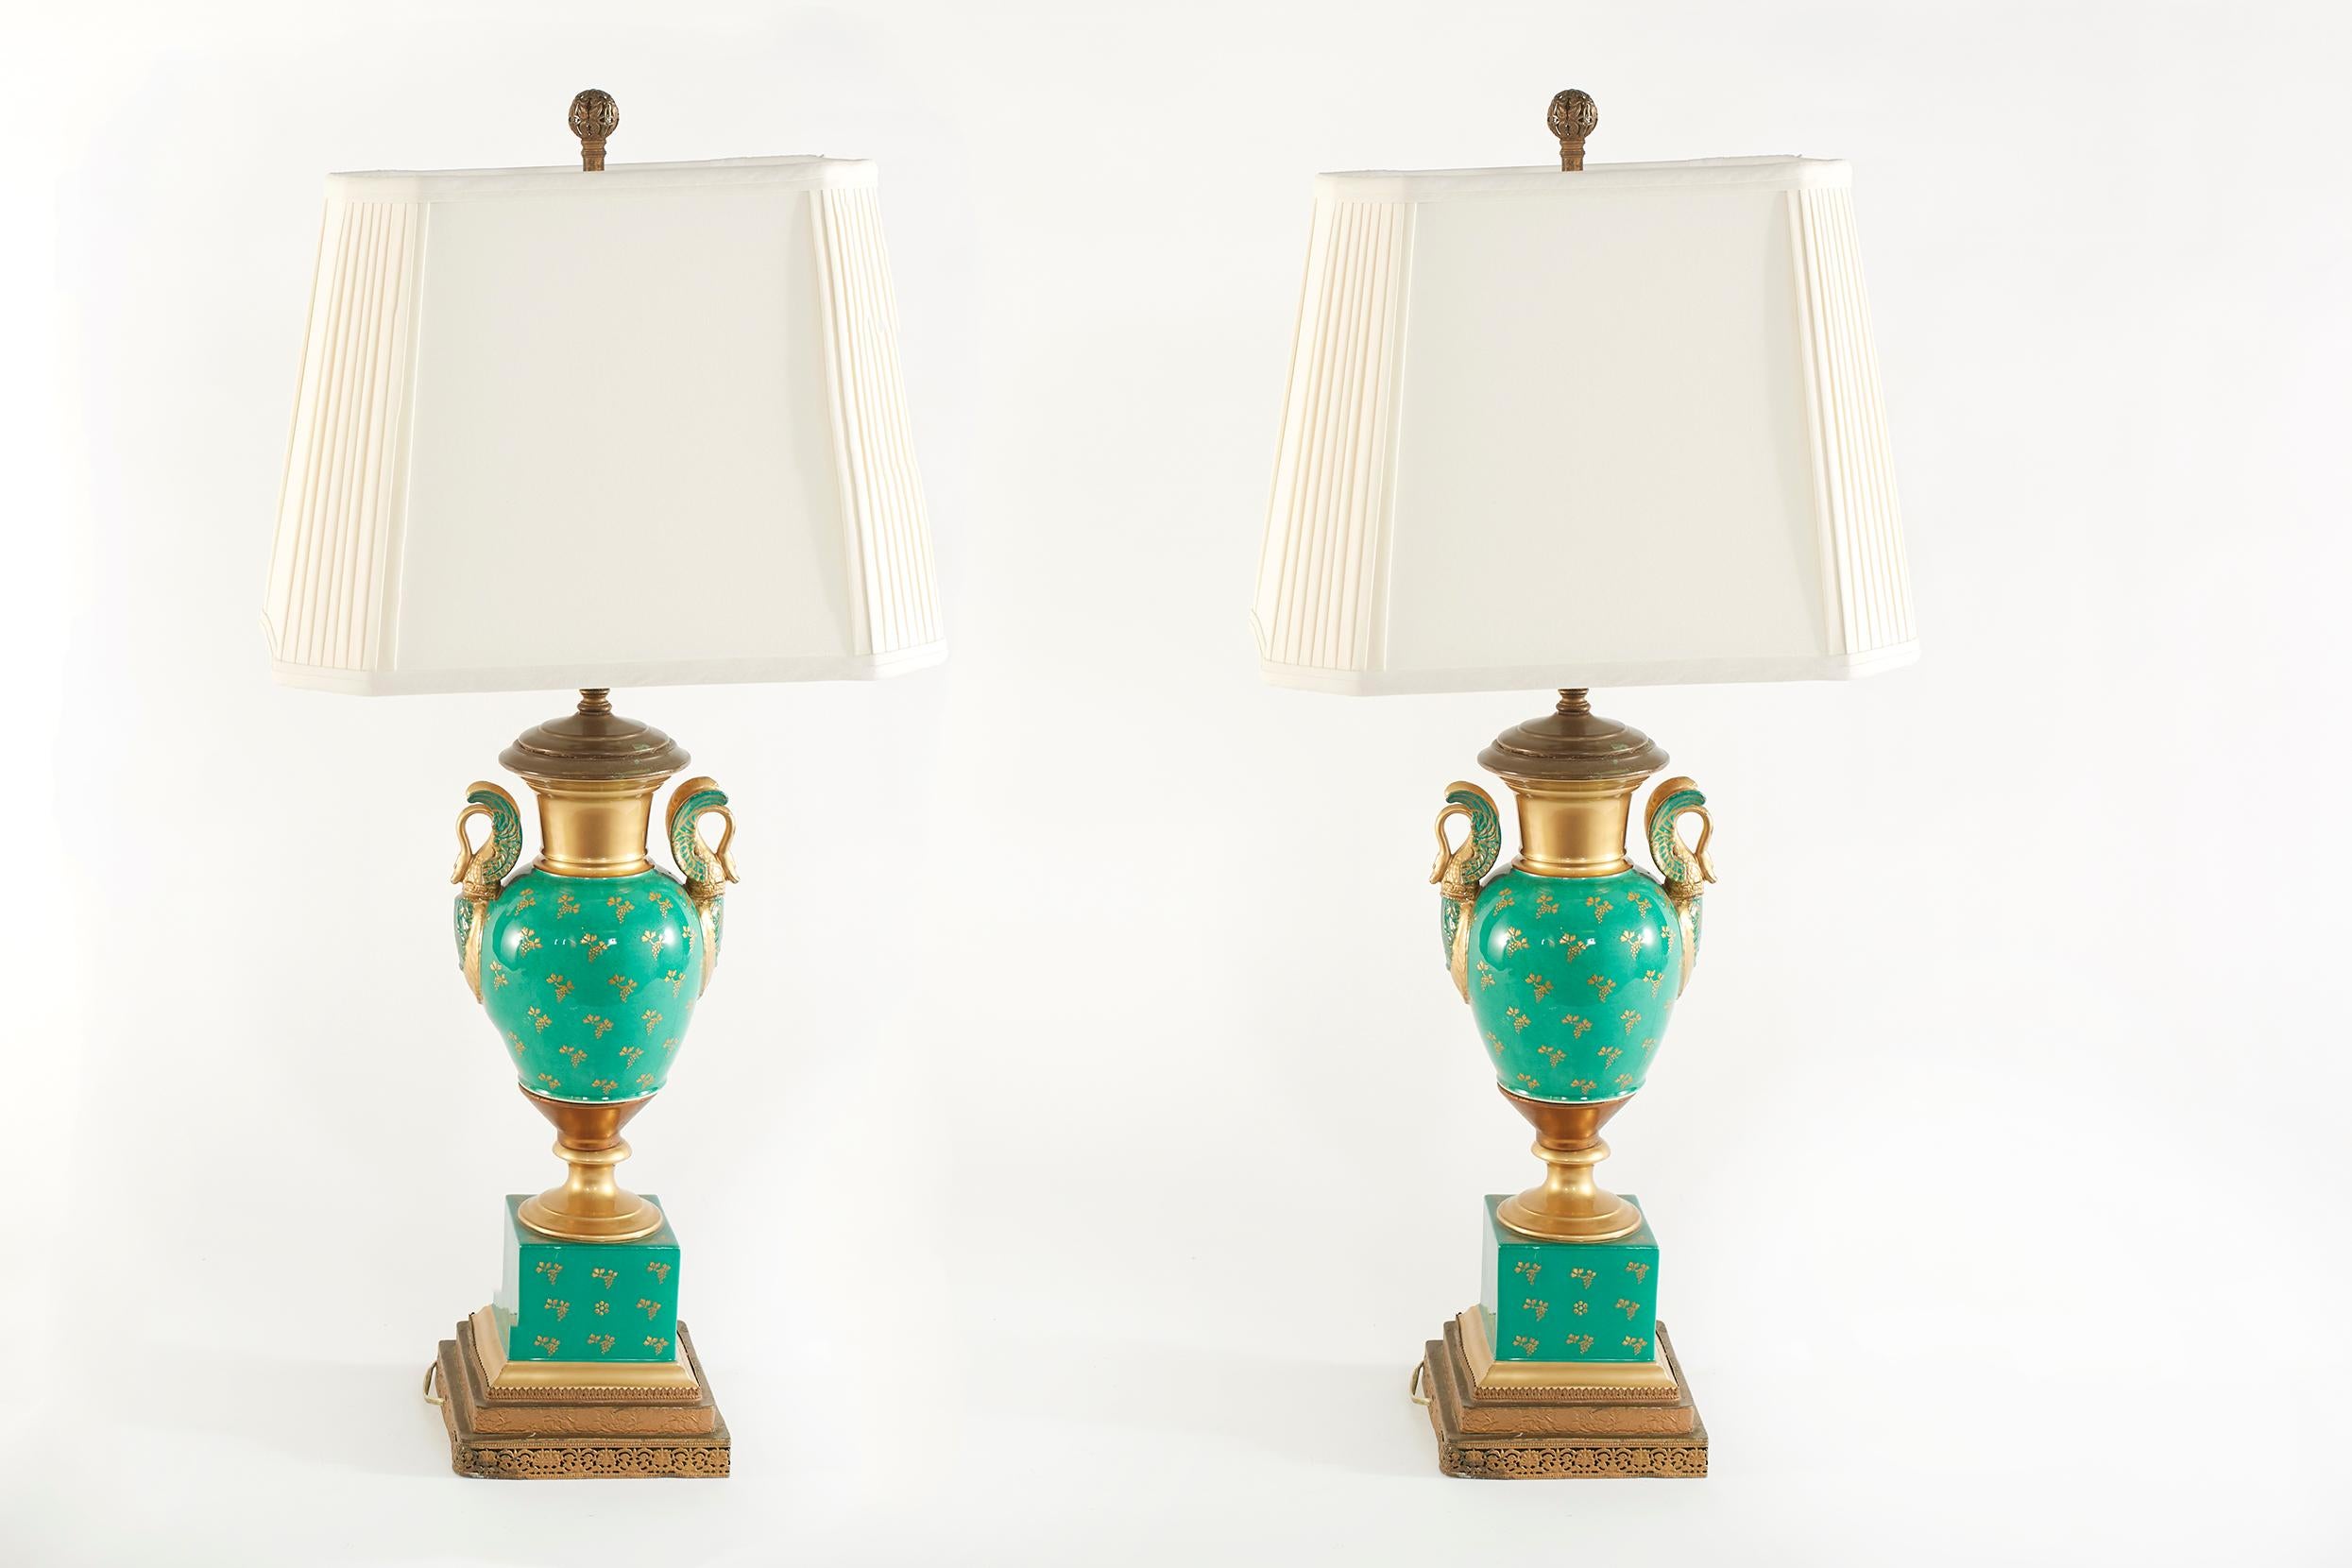 Hand-Painted 19th Century Gilt Porcelain / Brass Bass Table Lamps For Sale